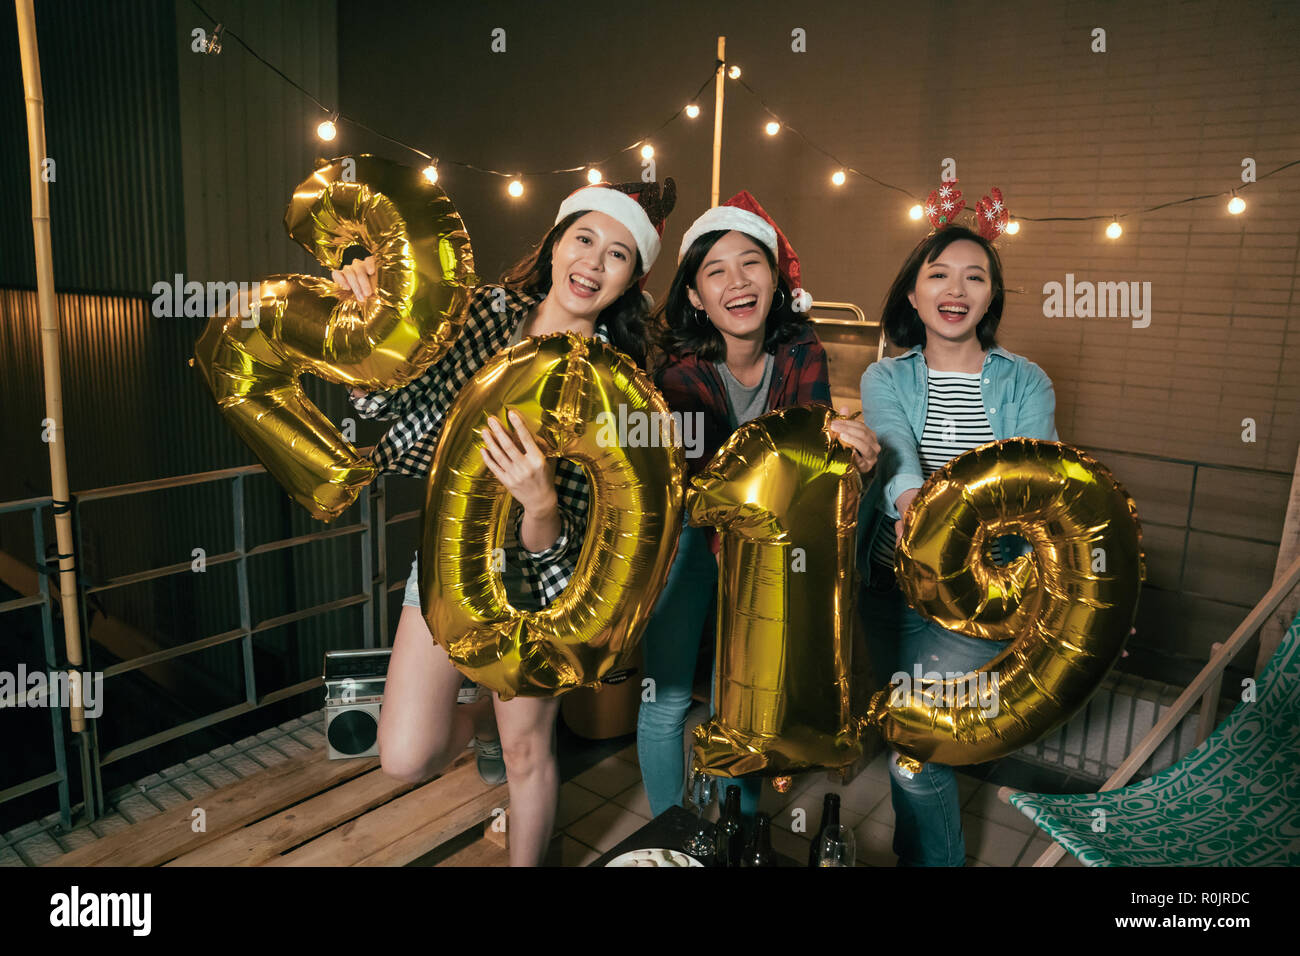 asian ladies enjoy music on balcony celebrating new year eve outdoor. young girls showing 2019 balloons on the roof at night. group of best friends en Stock Photo